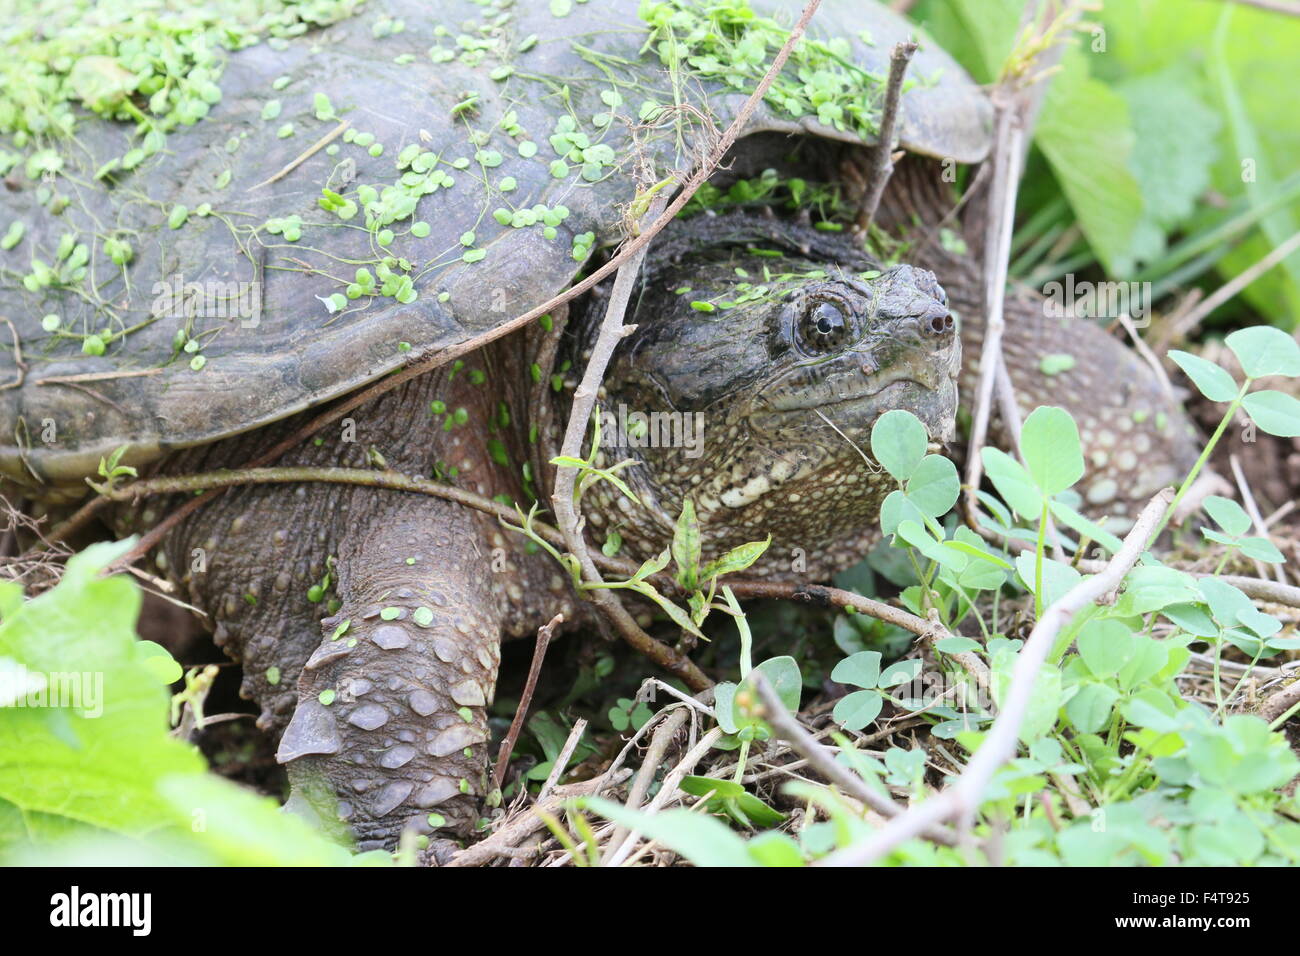 Snapping turtle on the ground. Stock Photo